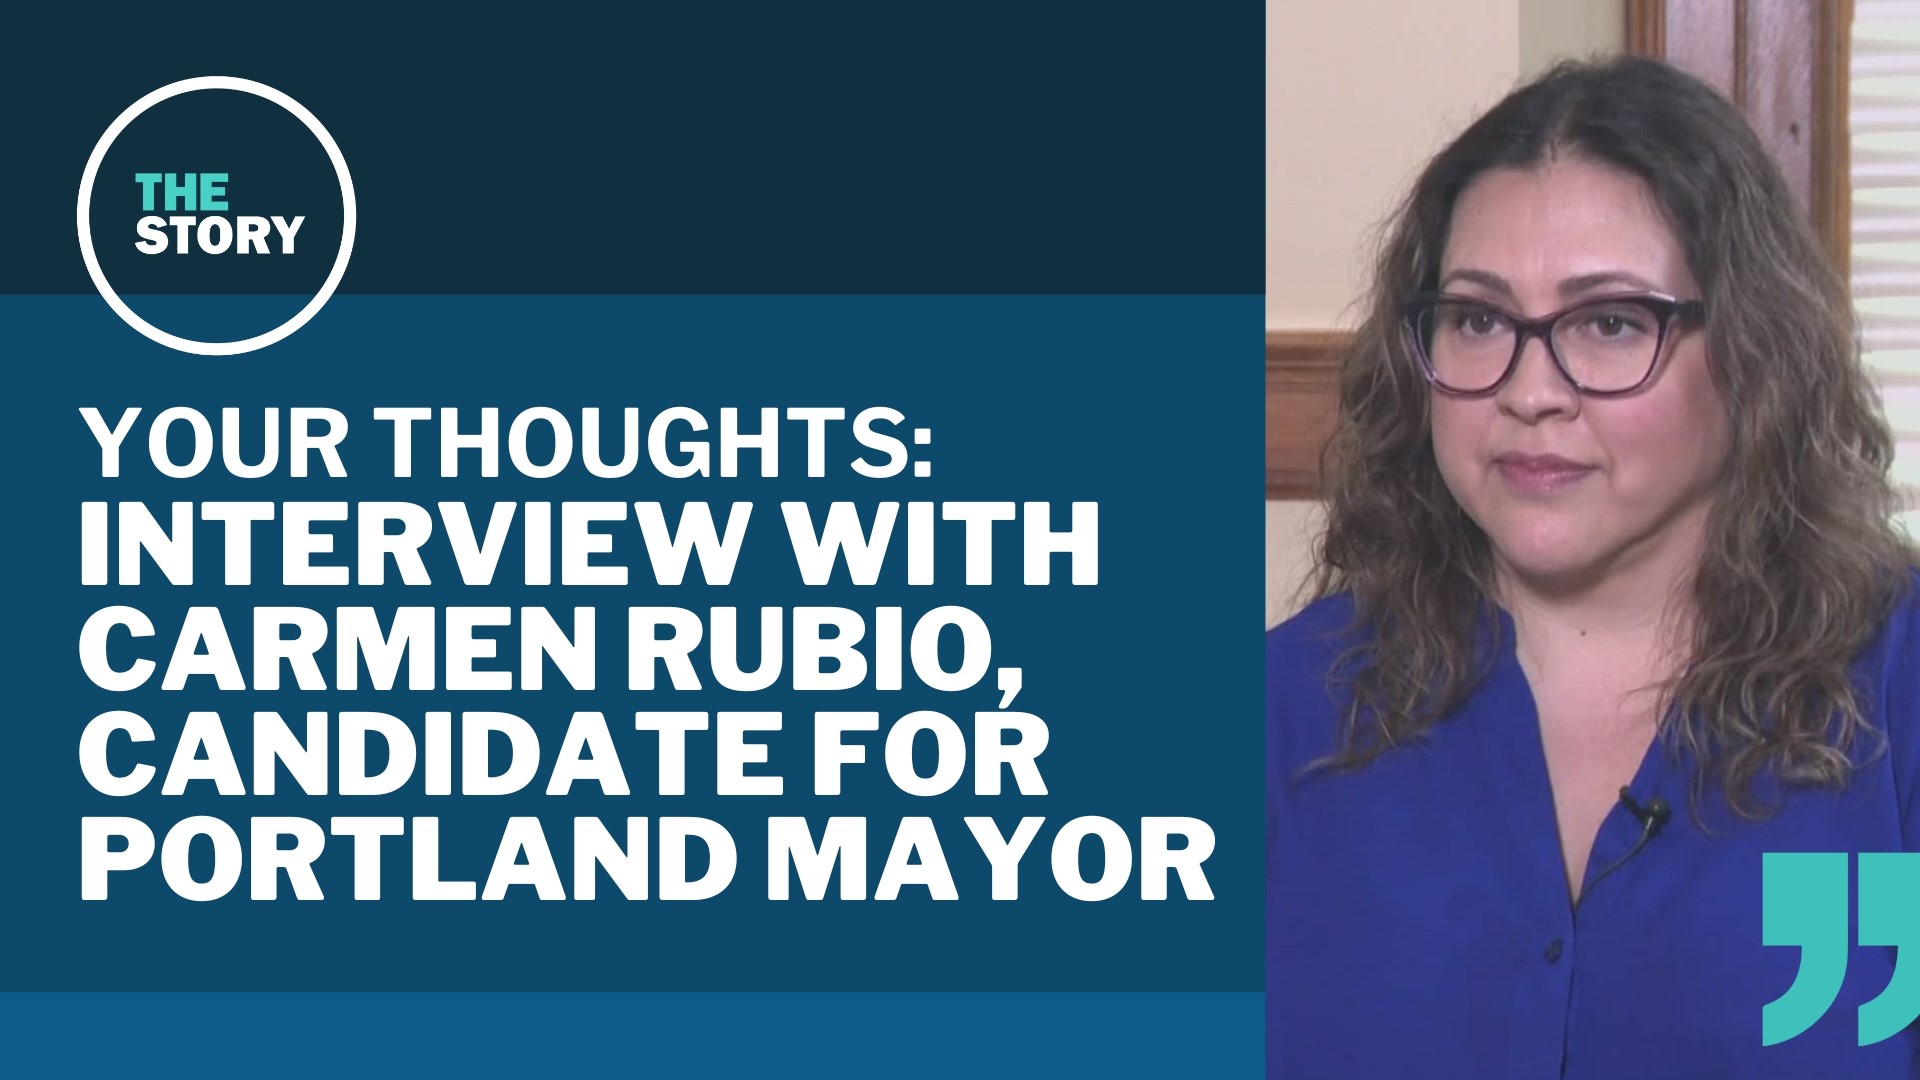 Commissioner Rubio was the last in a series of interviews conducted by reporter Blair Best with candidates for Portland mayor, all focused on homelessness policies.